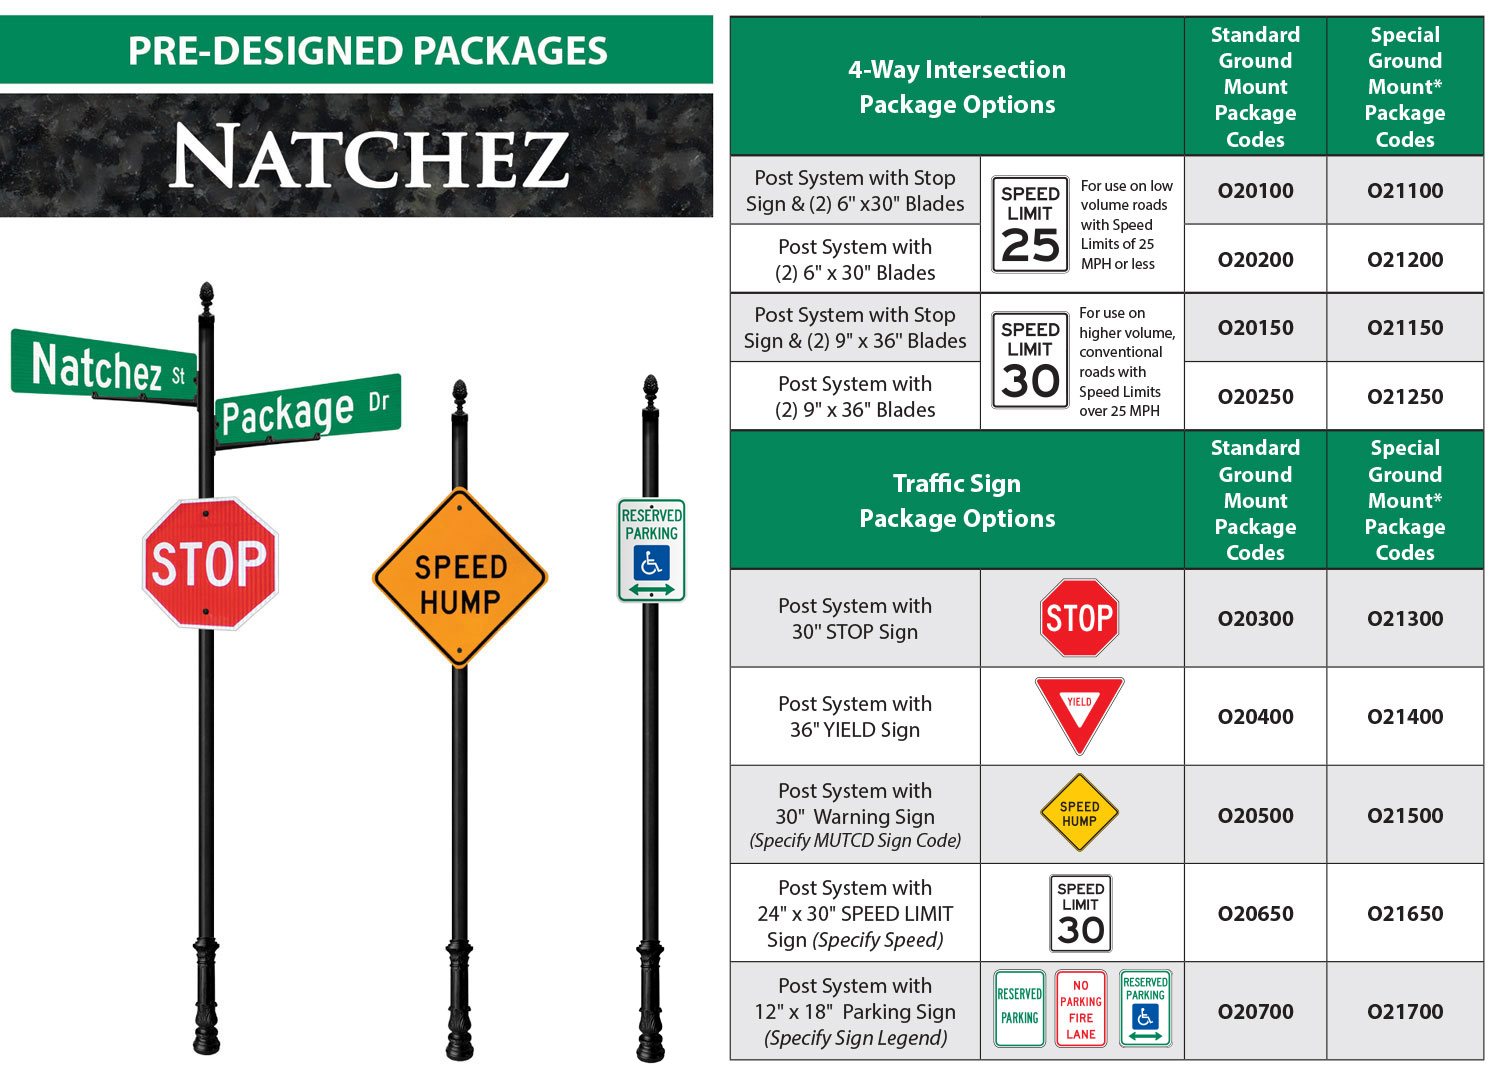 Natchez Packages Overview